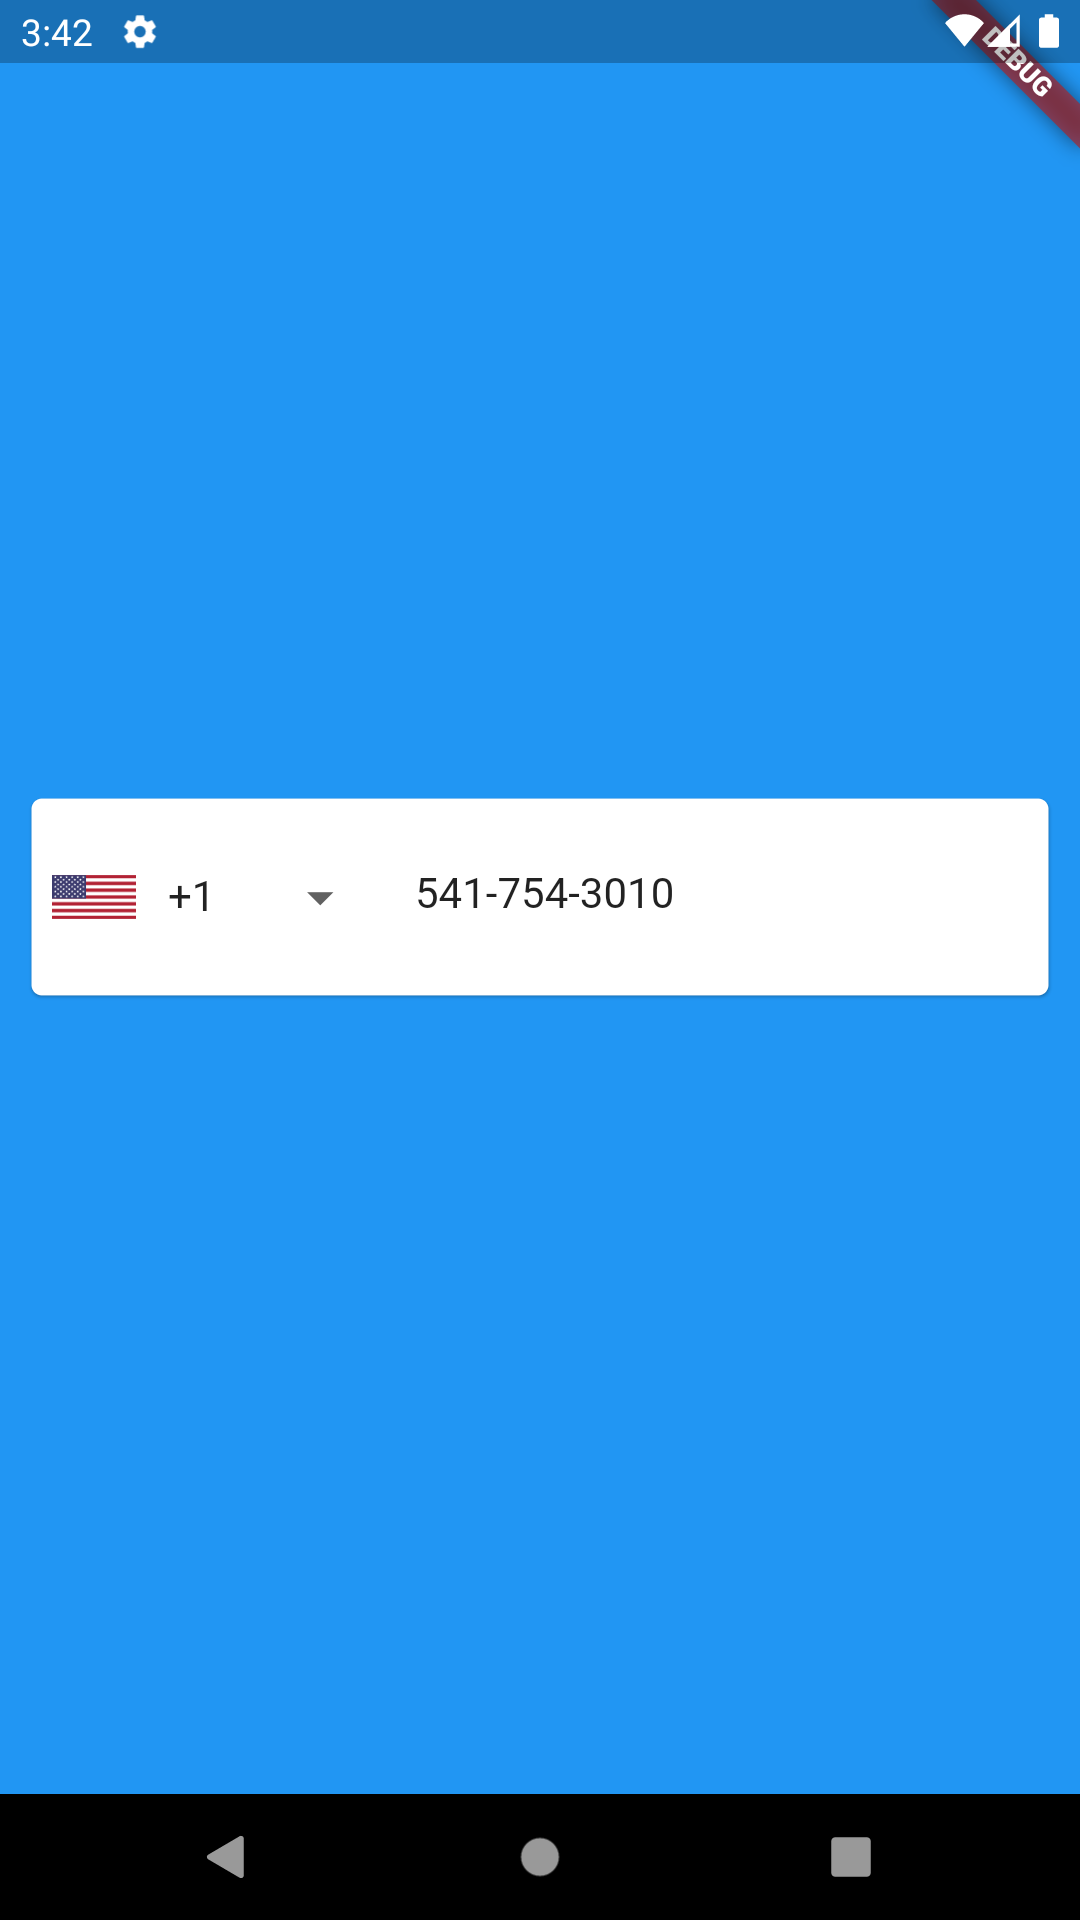 A simple and customizable flutter package for inputting phone number in intl / international format uses Google's libphonenumber